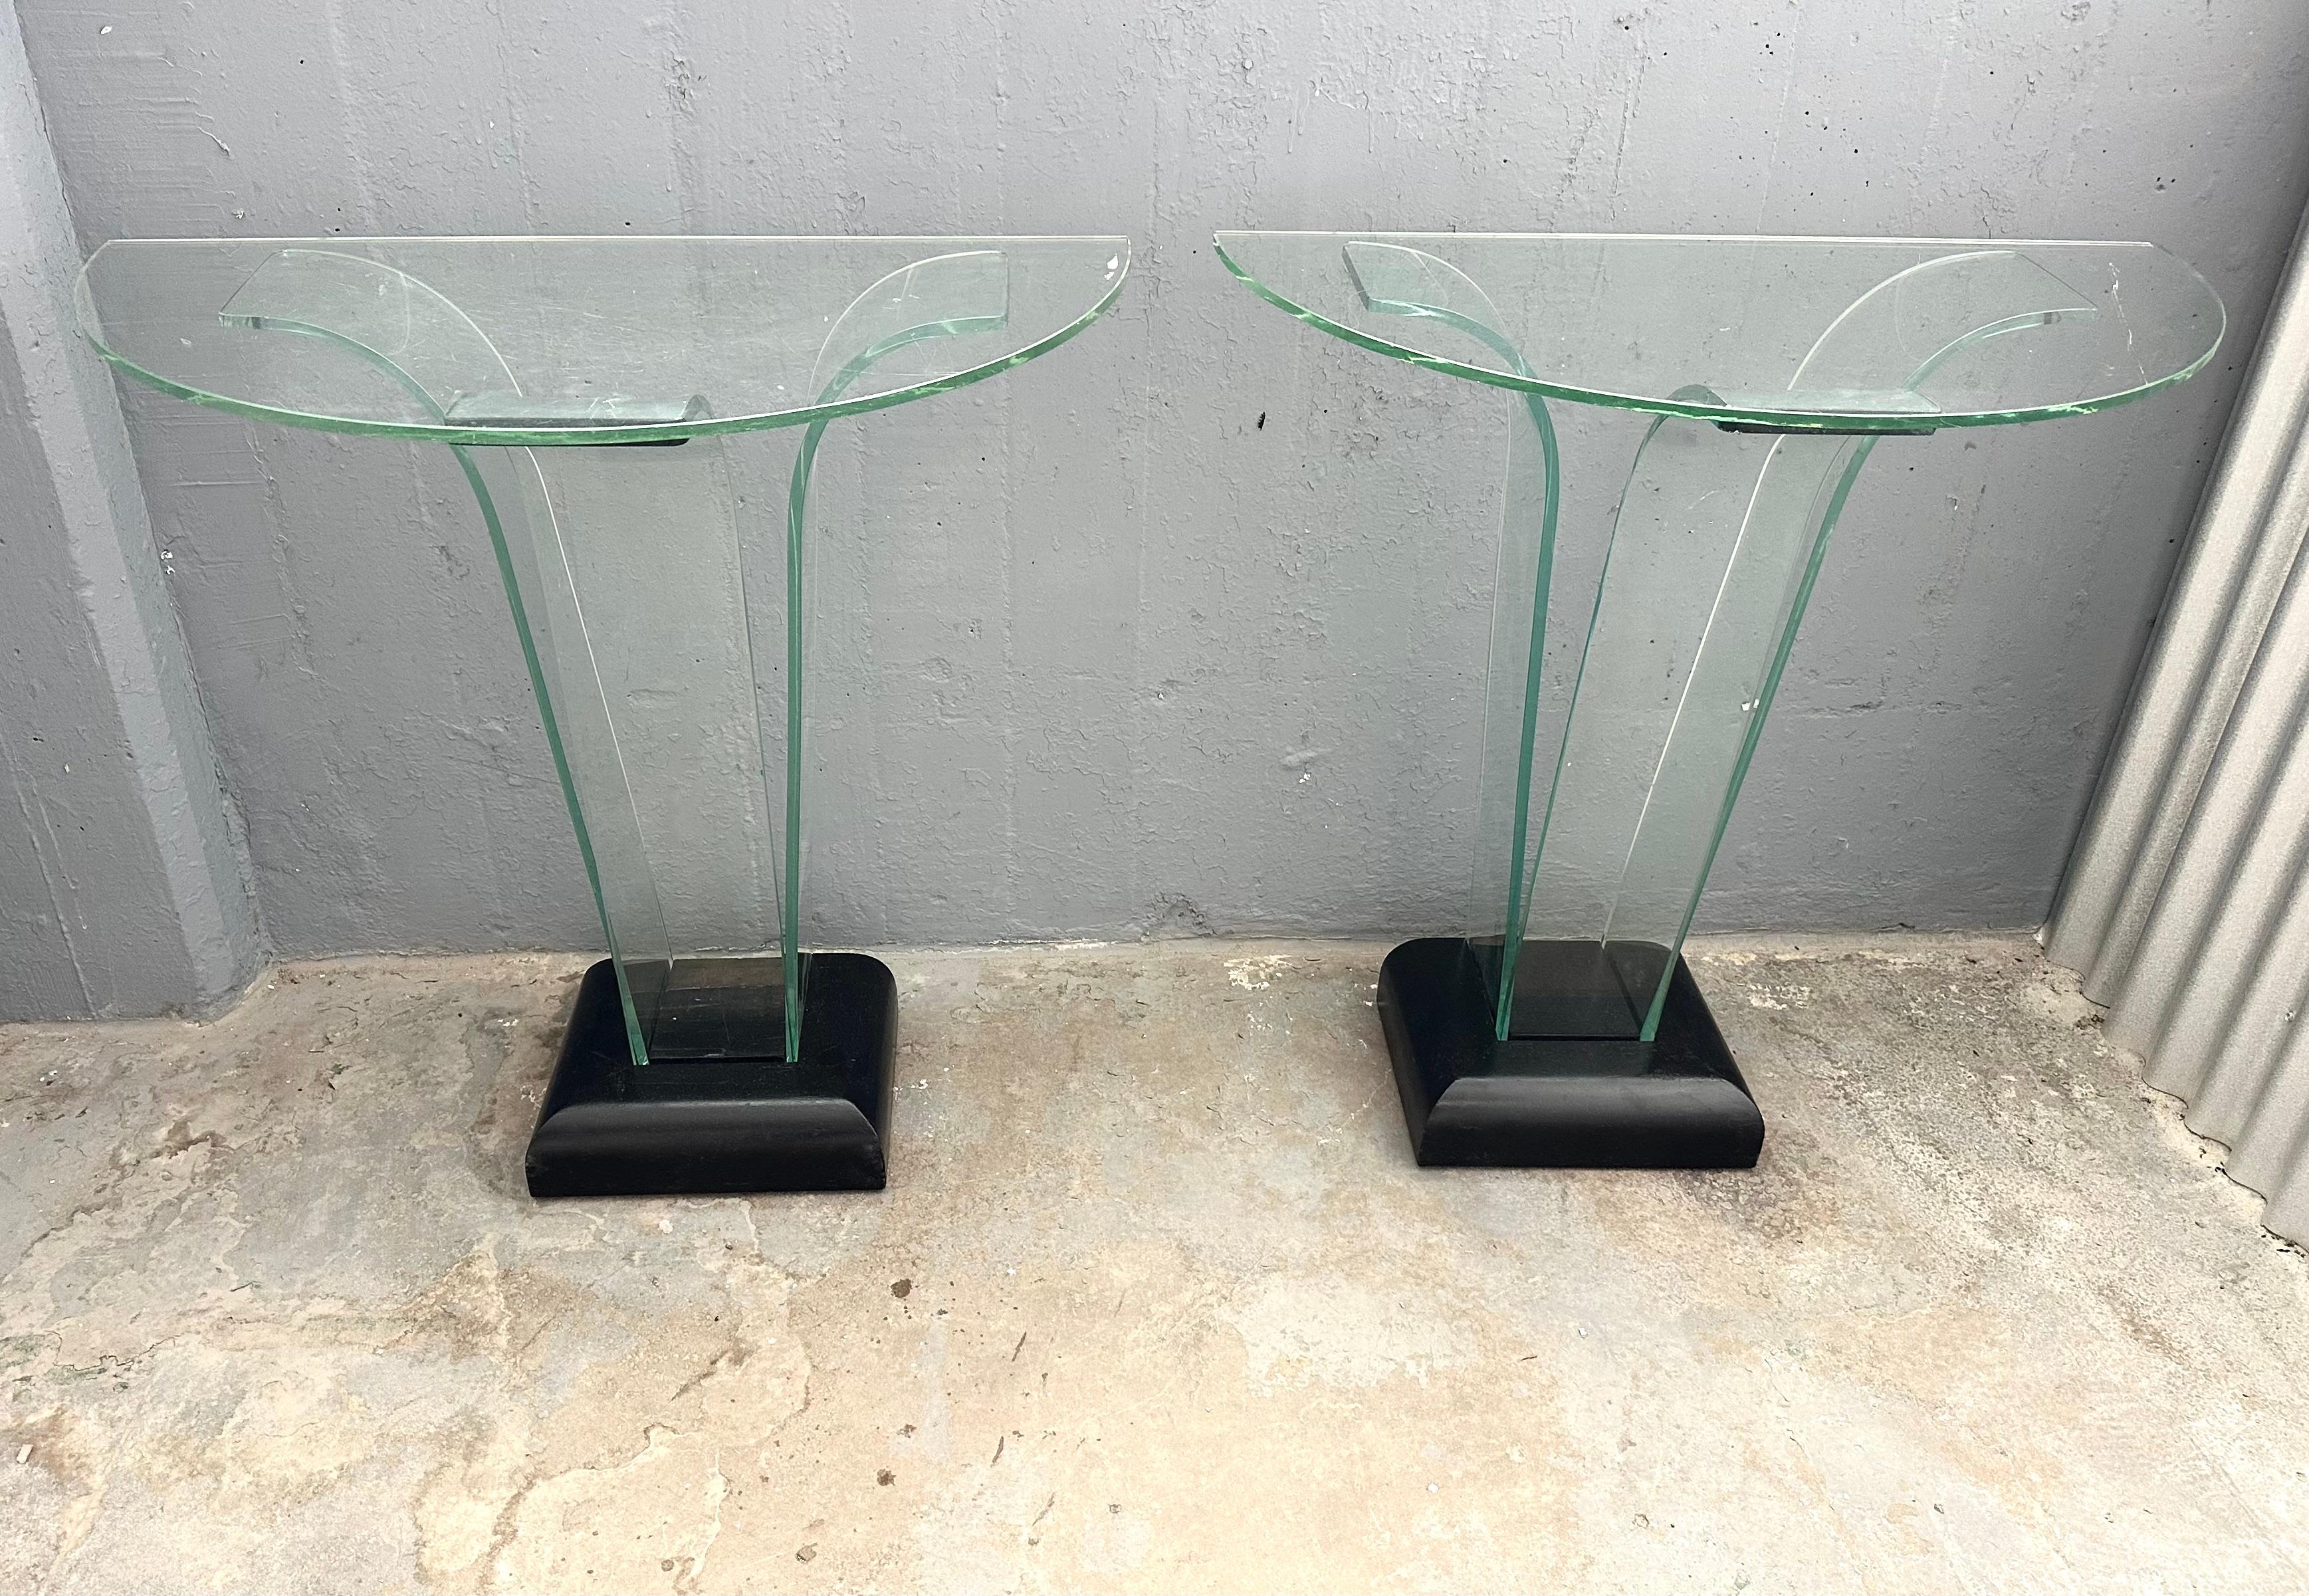 Fabulous vintage pair of curved glass and ebonized wood console tables, designed by Ben Mildwoff and manufactured by his industrial glass company.  Incredibly contemporary looking, this true Art Deco design epitomizes the early modernist fascination